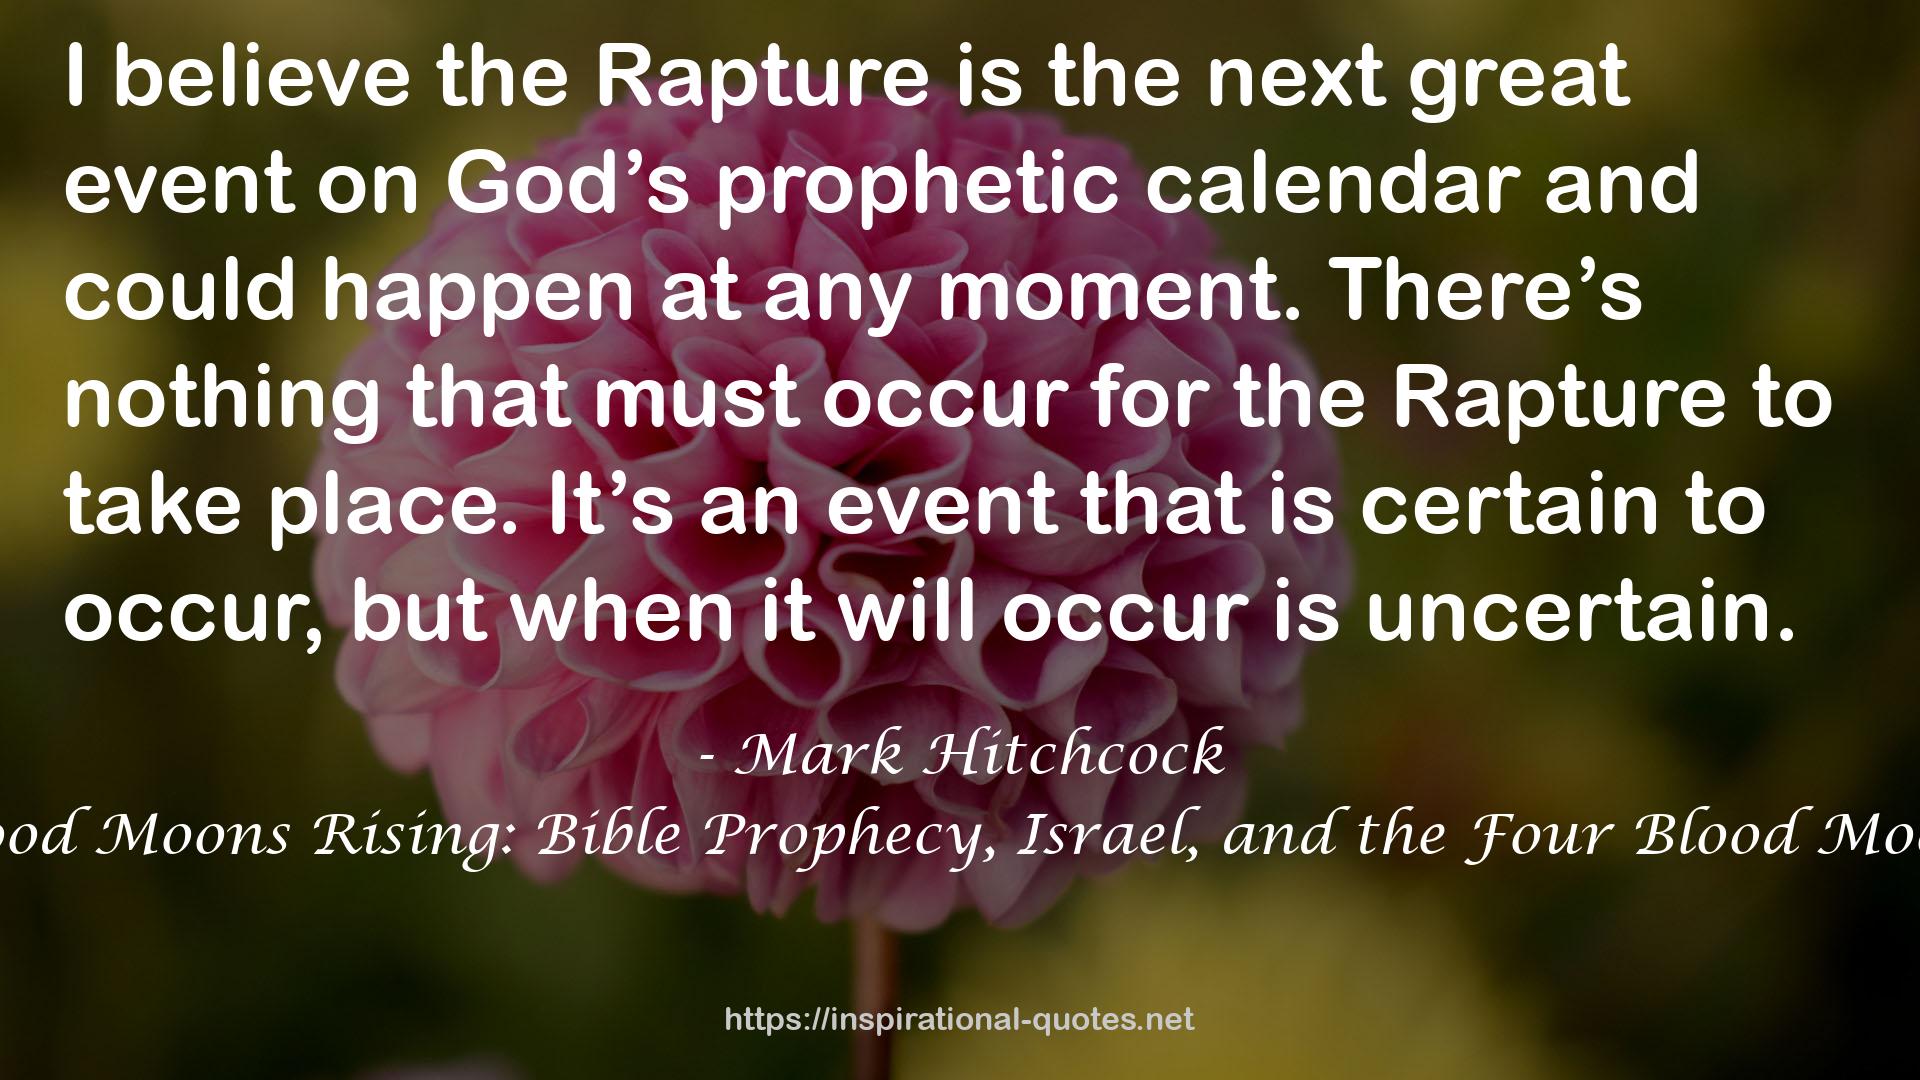 Blood Moons Rising: Bible Prophecy, Israel, and the Four Blood Moons QUOTES